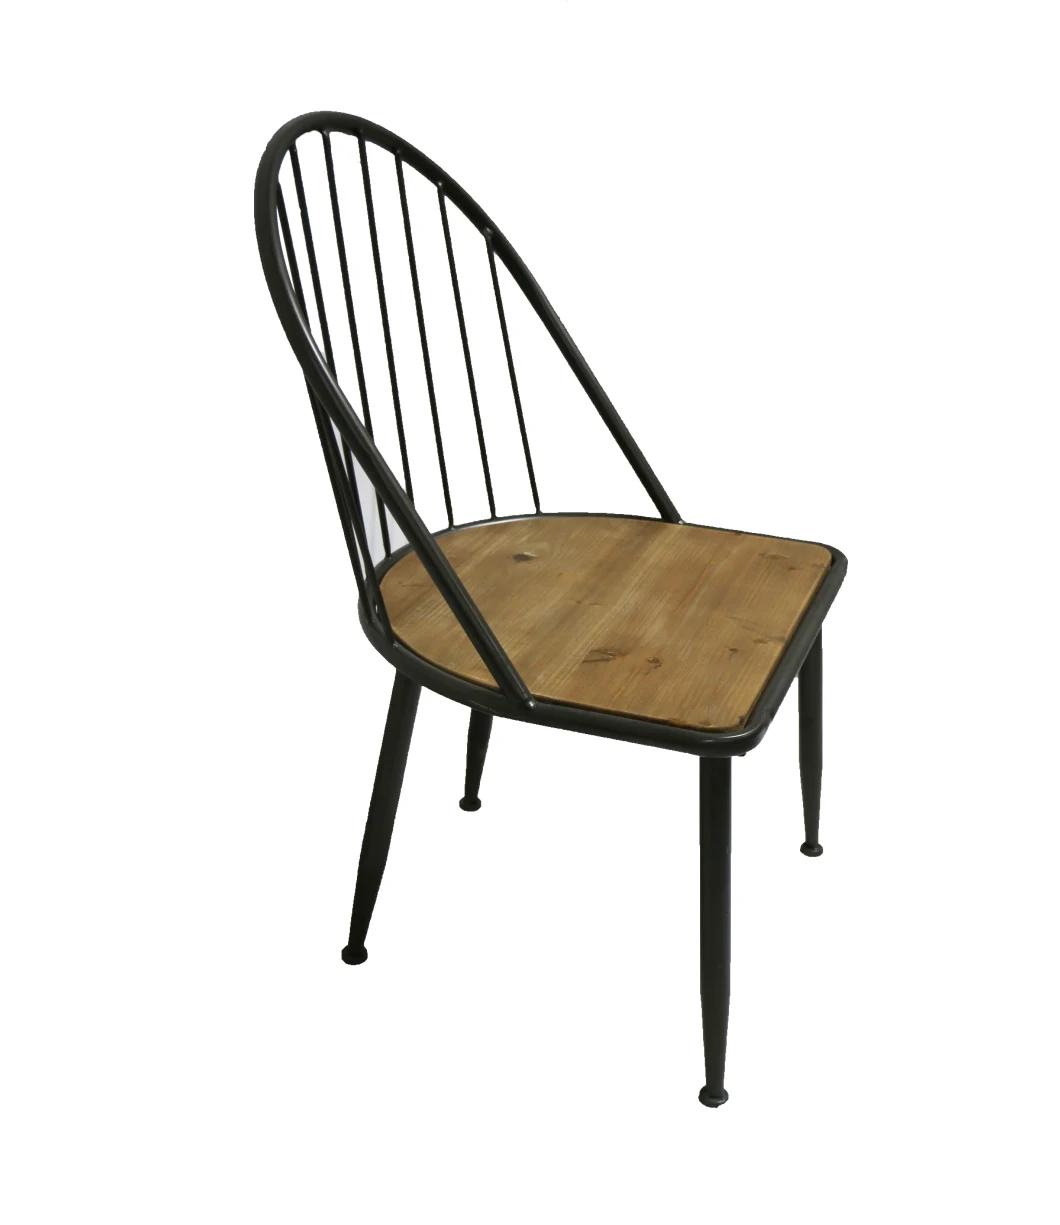 Welcomed Unique Designed Chair Supplied by Brand Eleganghome